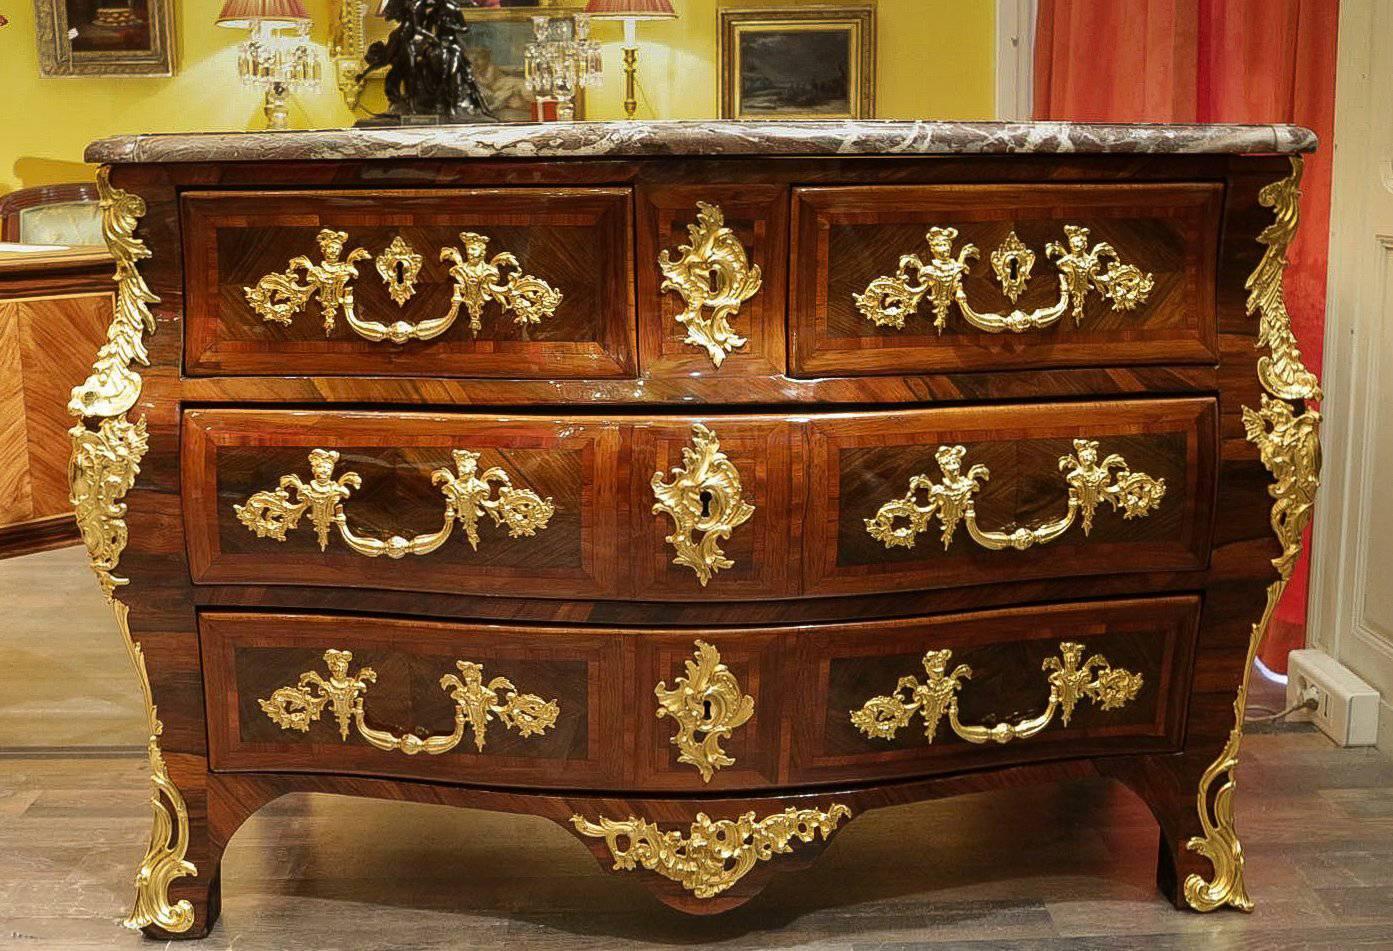 We are pleased to present you an amazing, beautiful, elegant and rare French Louis XV period marble top commode with four-drawer serpentine and bombe chest with multi wood inlay and magnificent gilt bronze mounts.
Maker monogram stamp and JME on